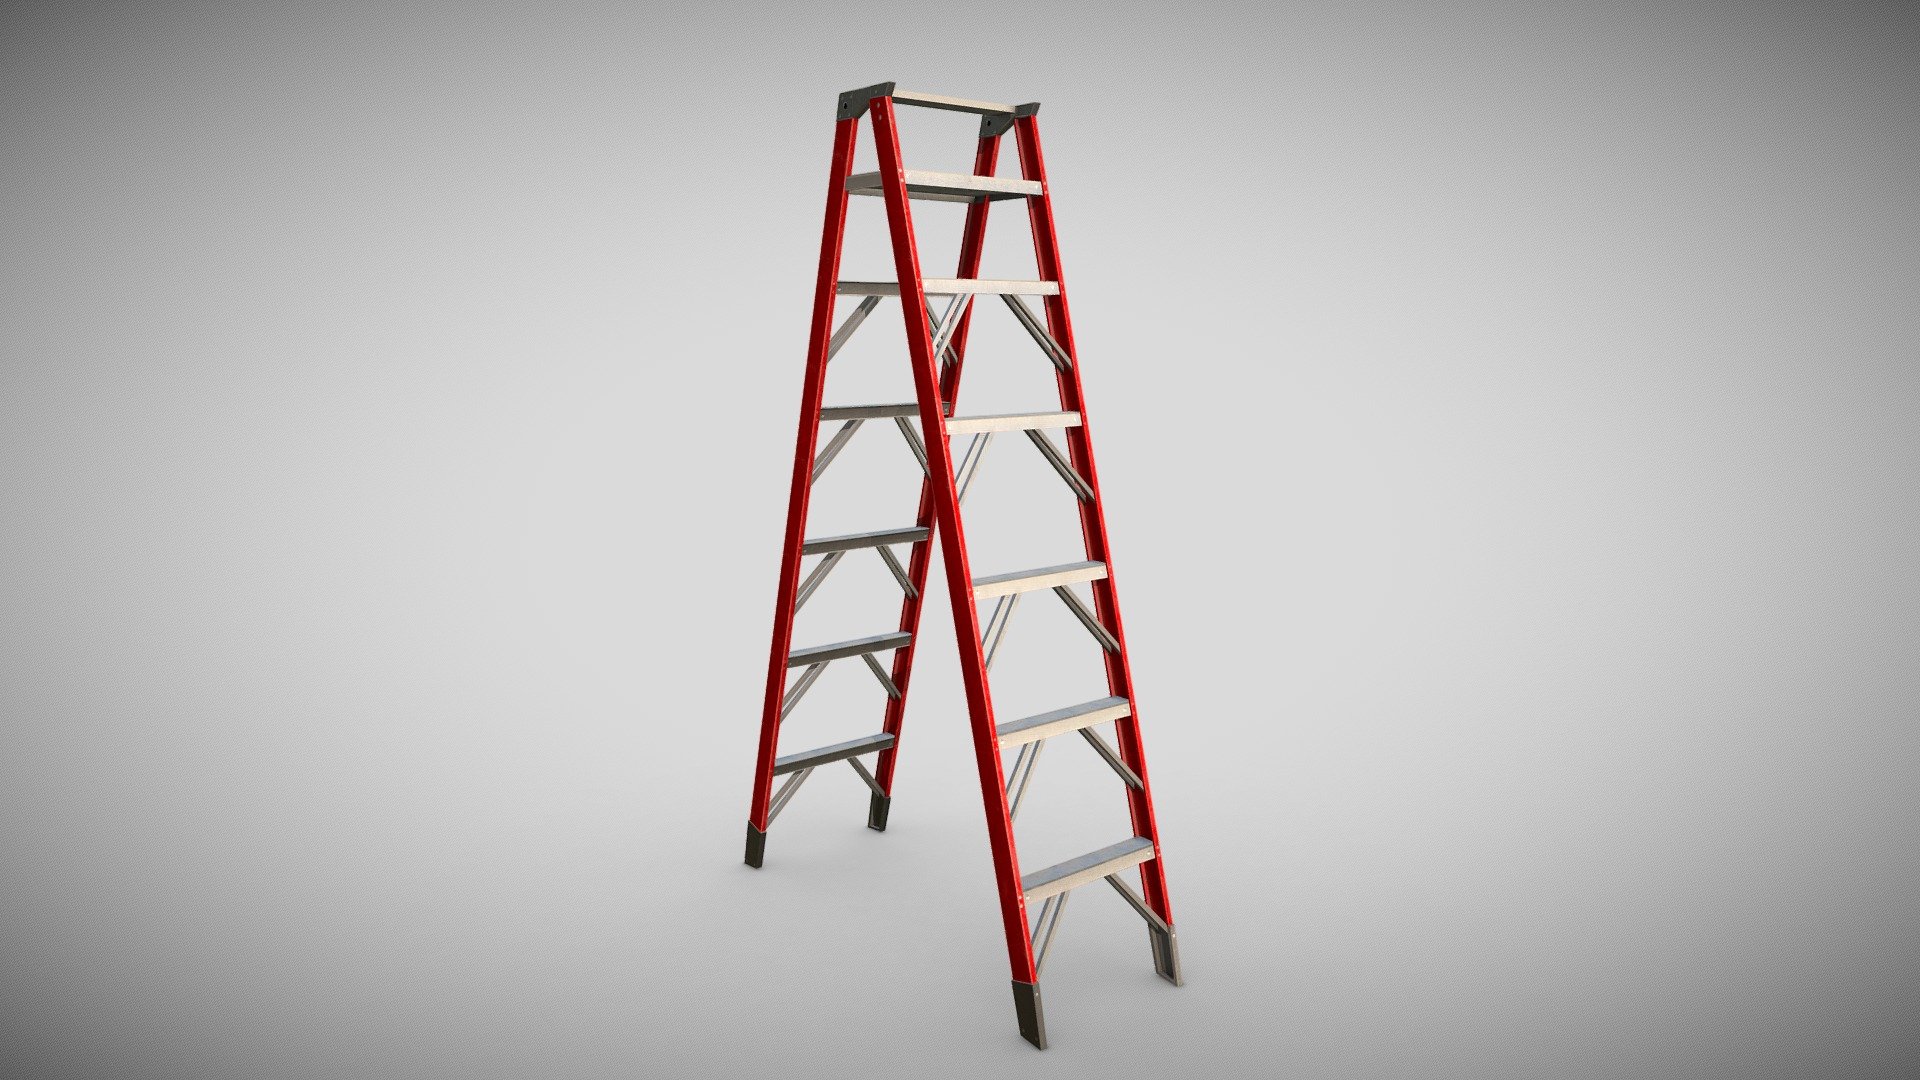 Step ladder 3D Model High Detail. Production-ready/Game-ready 3D Model, with PBR materials, textures and UVs provided in the package.

Package Includes:

Formats: FBX, OBJ, MAX; scenes: other:

1 Object (mesh), PBR Materials, UV-mapped Textures.

UV Layout maps and Image Textures resolutions: 2048x2048.

Real world dimensions; scene scale units: cm in 3DS Max.

Polygon Count - Triangles: 804

Step ladder created for a VR scene modeld in 3D’s Max and PBR Textures made with Substance Painter 3d model